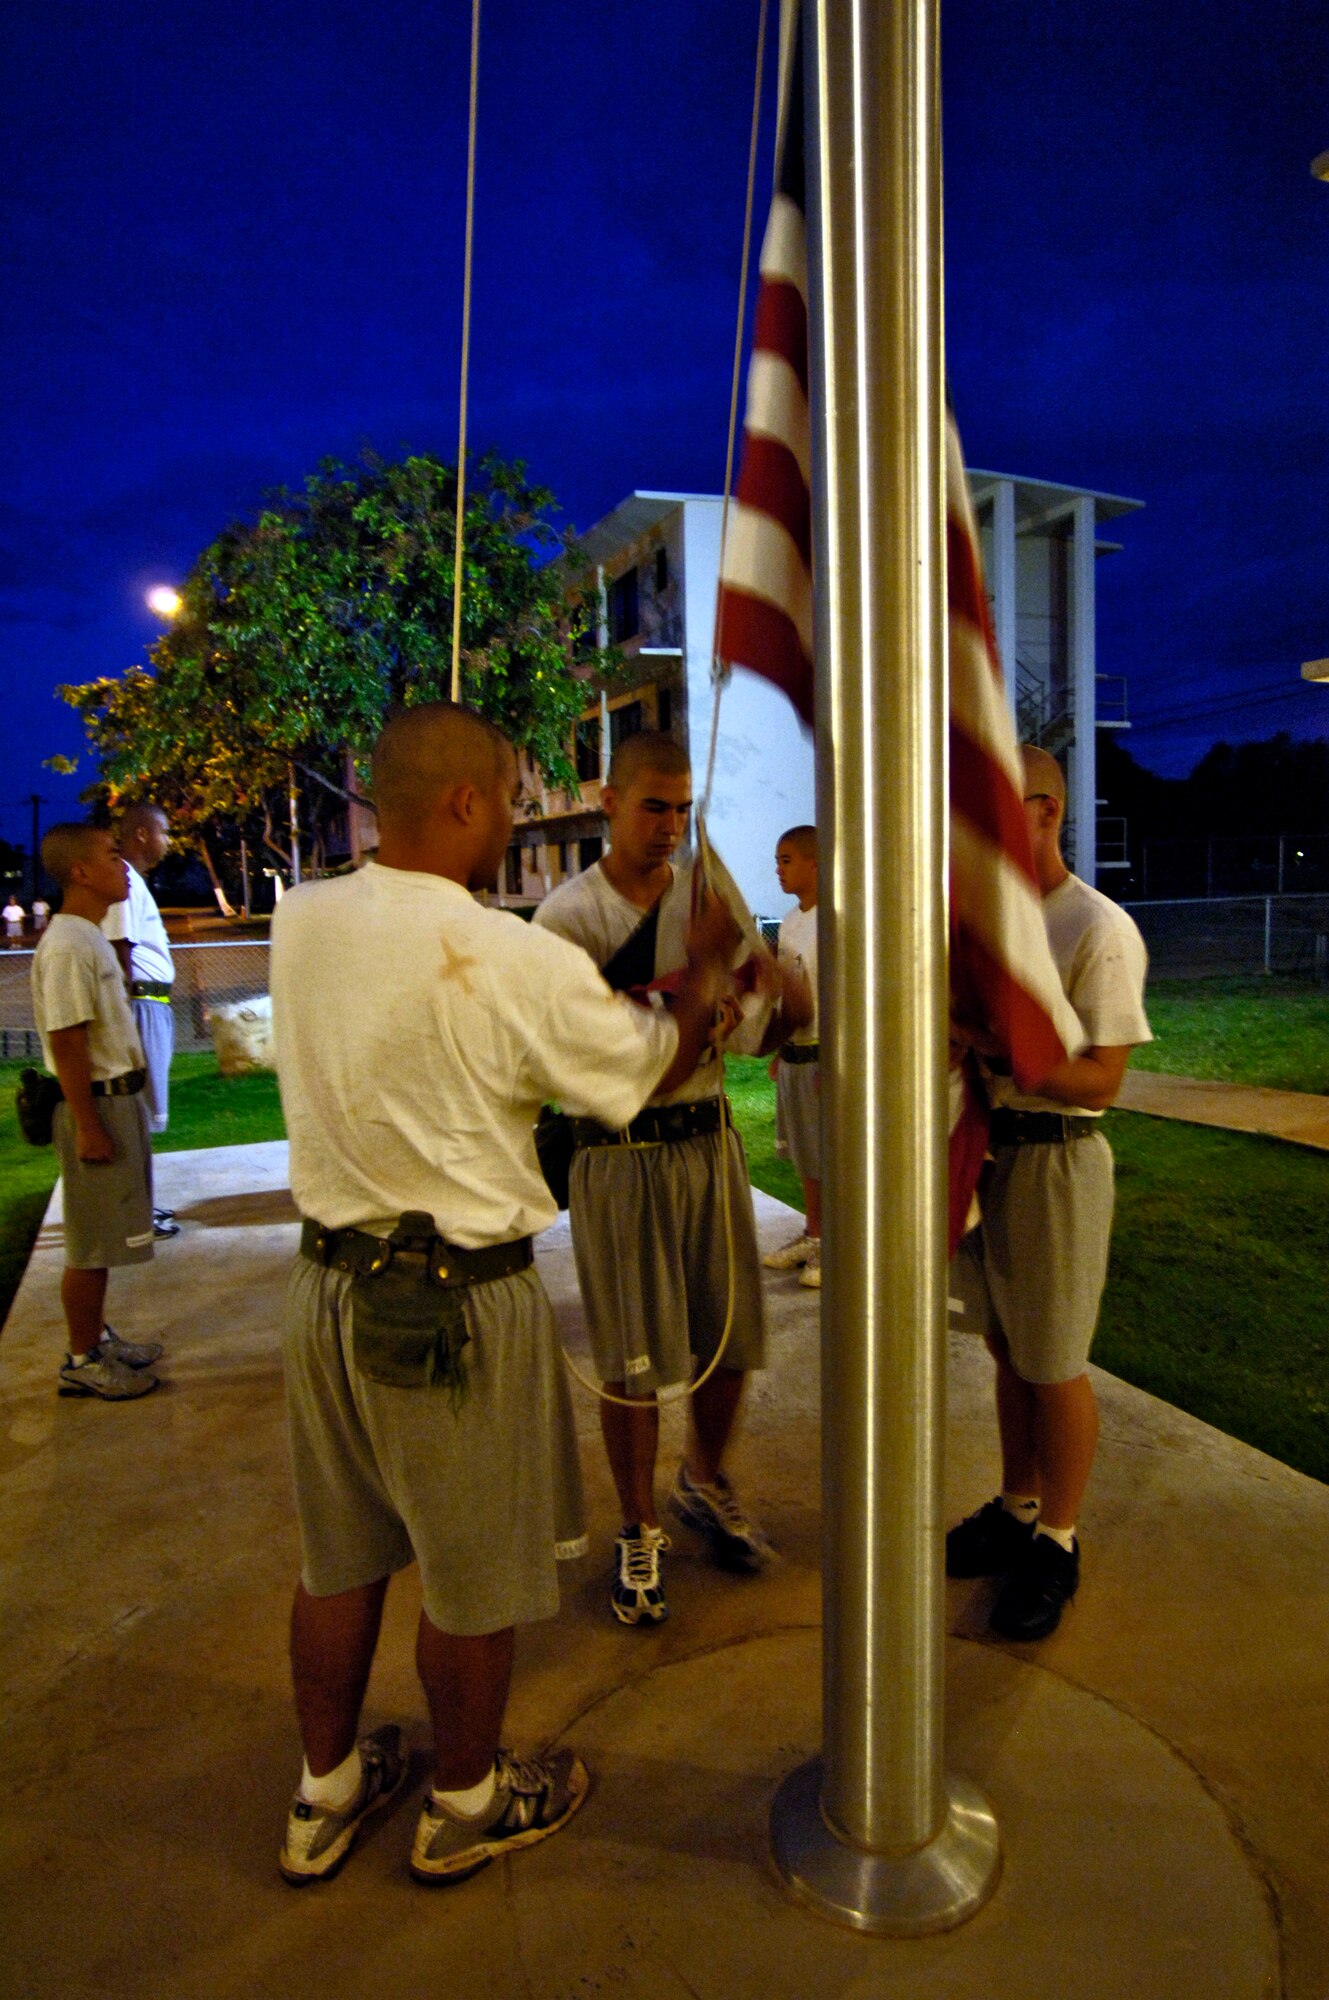 Cadets raise the flag at the Hawaii National Guard Youth Challenge Academy in Kapolei, Hawaii, on Thursday, May 18, 2006. The academy staff teach life skills to non-traditional students so they can be successful in the community and earn a high school diploma.  (U.S. Air Force photo/Tech. Sgt. Shane A. Cuomo)